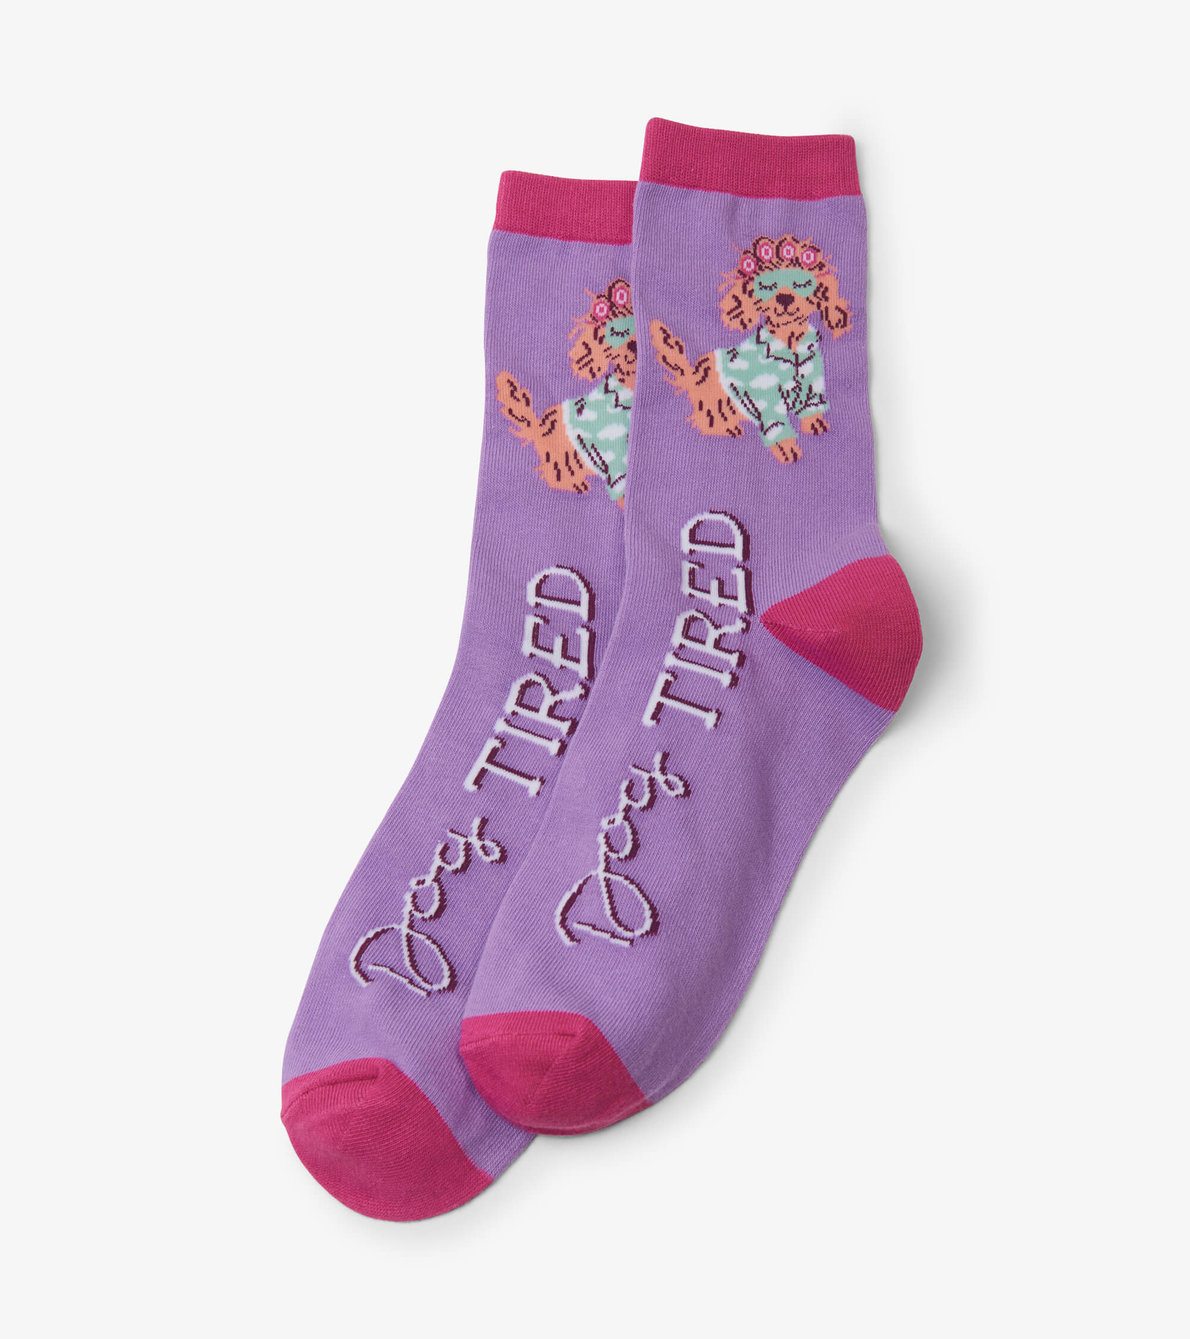 View larger image of Dog Tired Women's Crew Socks